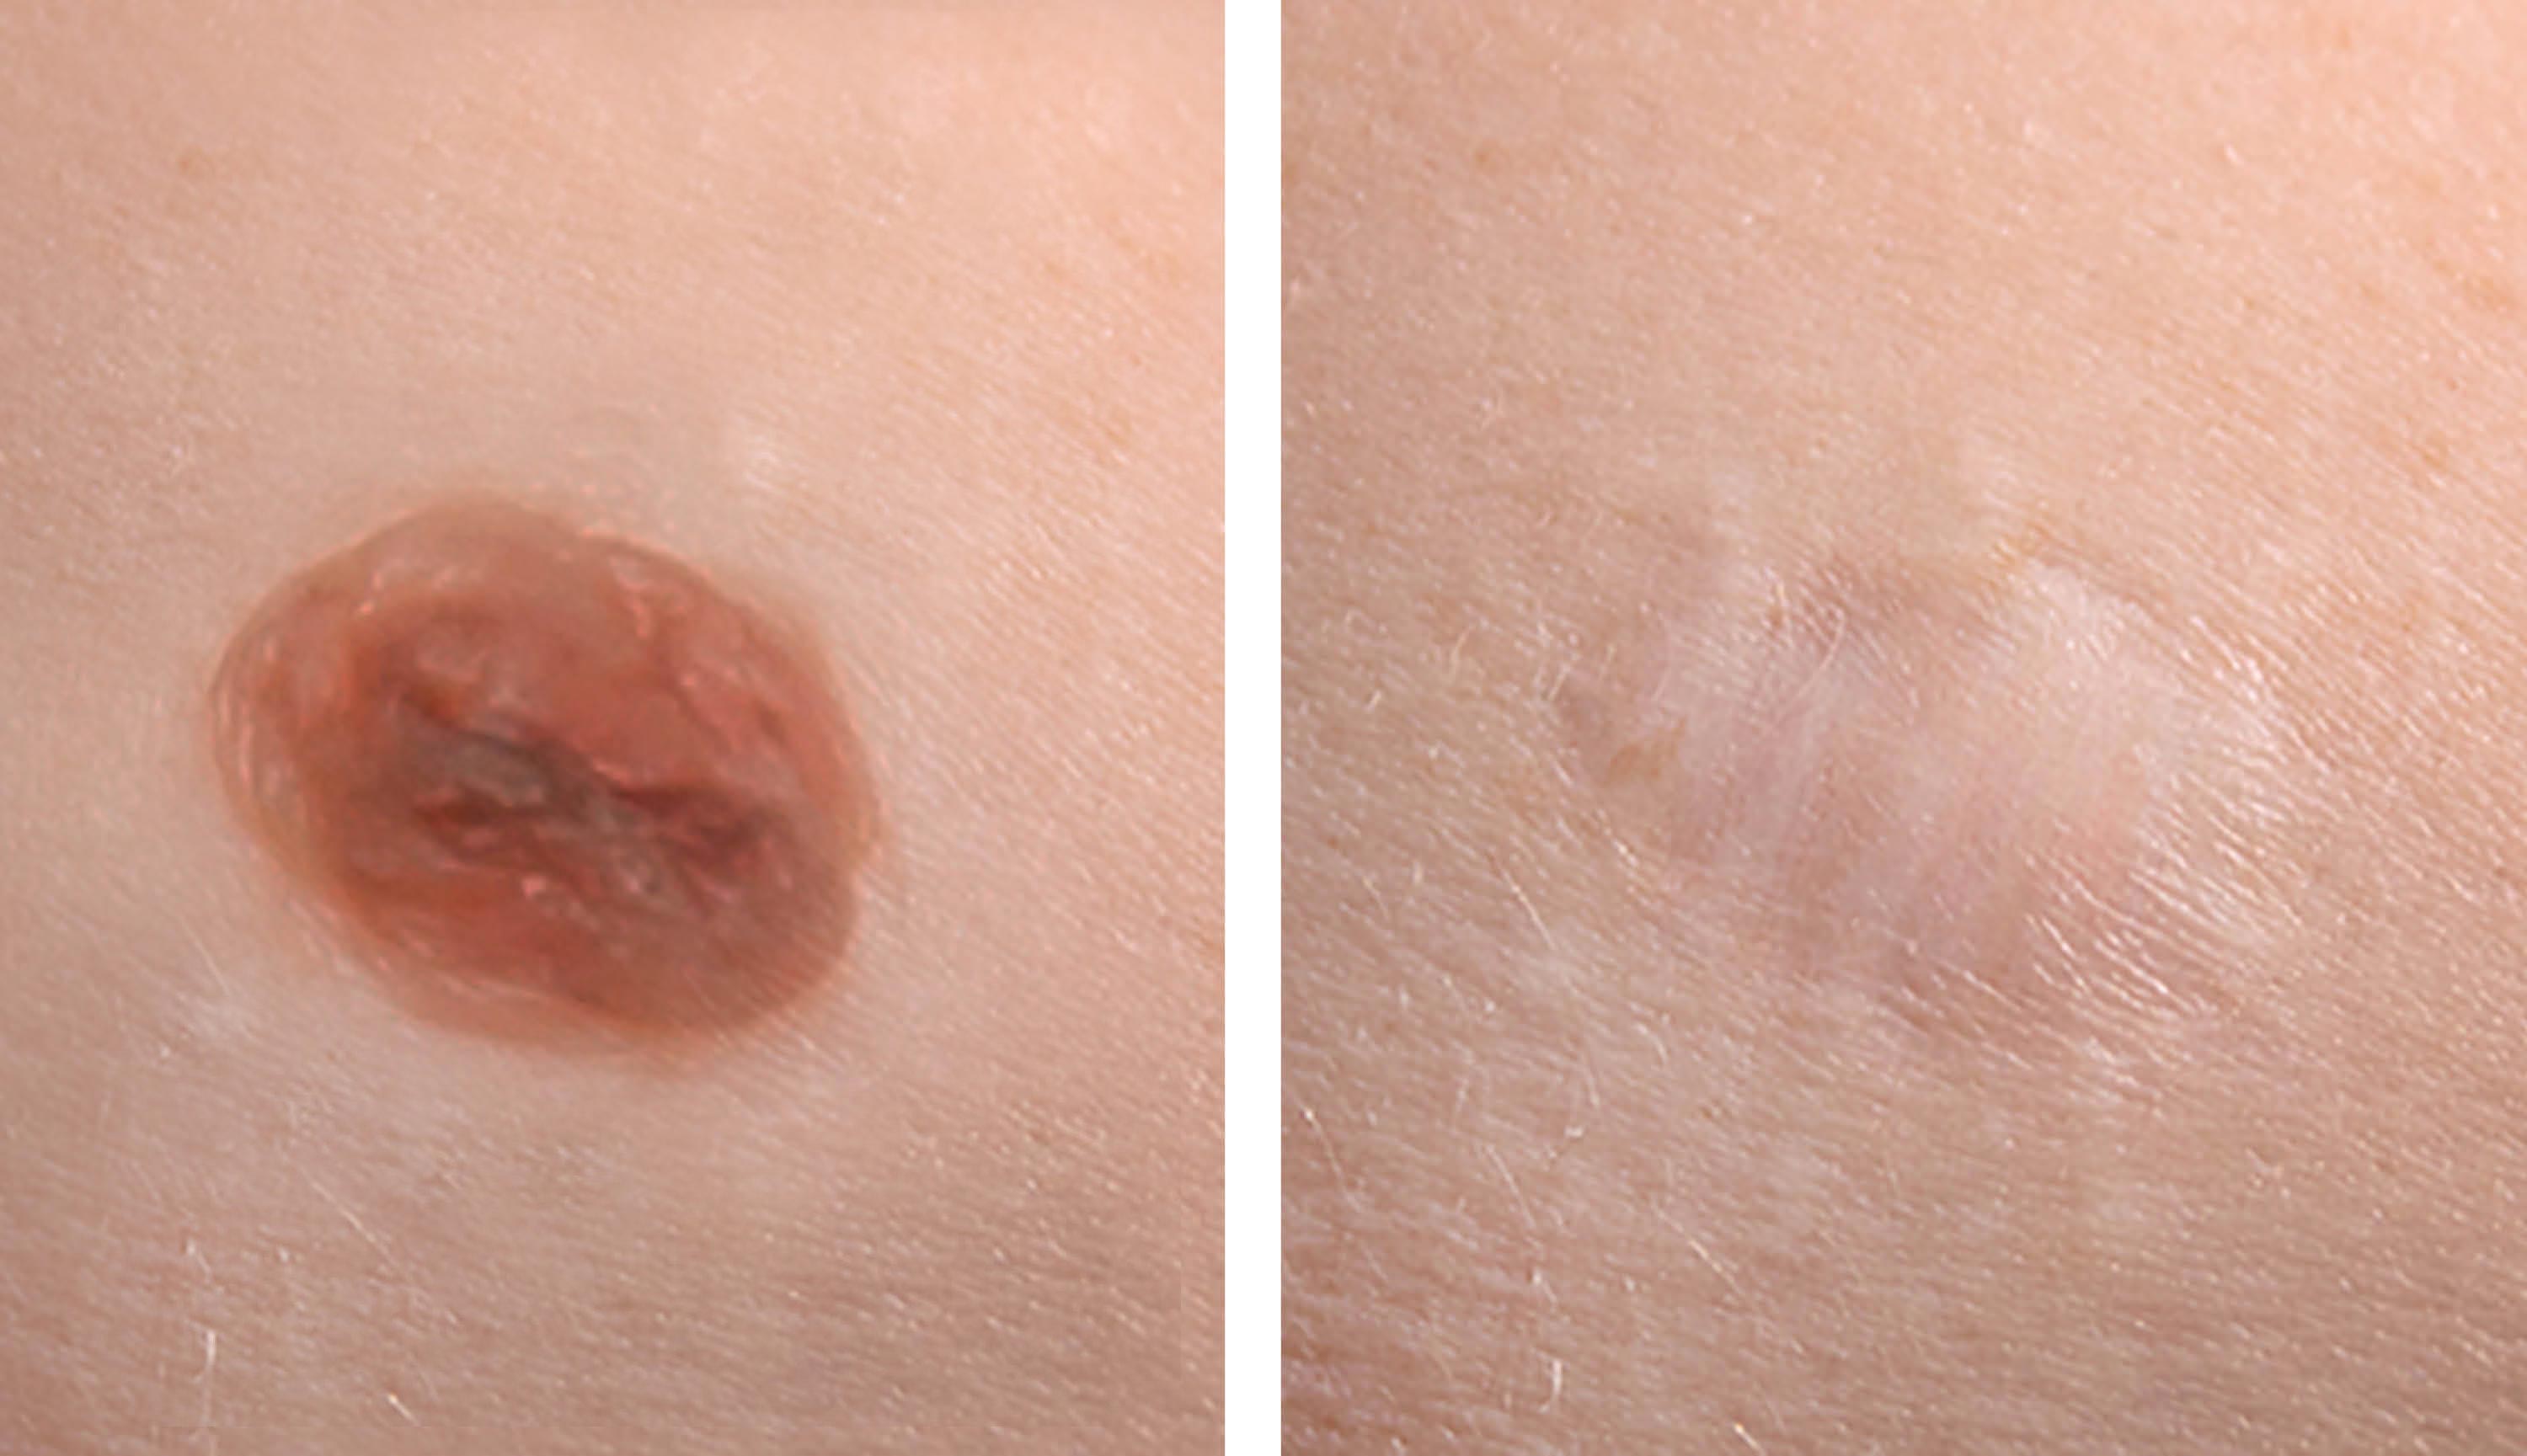 Mole removal before and after: the skin has healed completely.